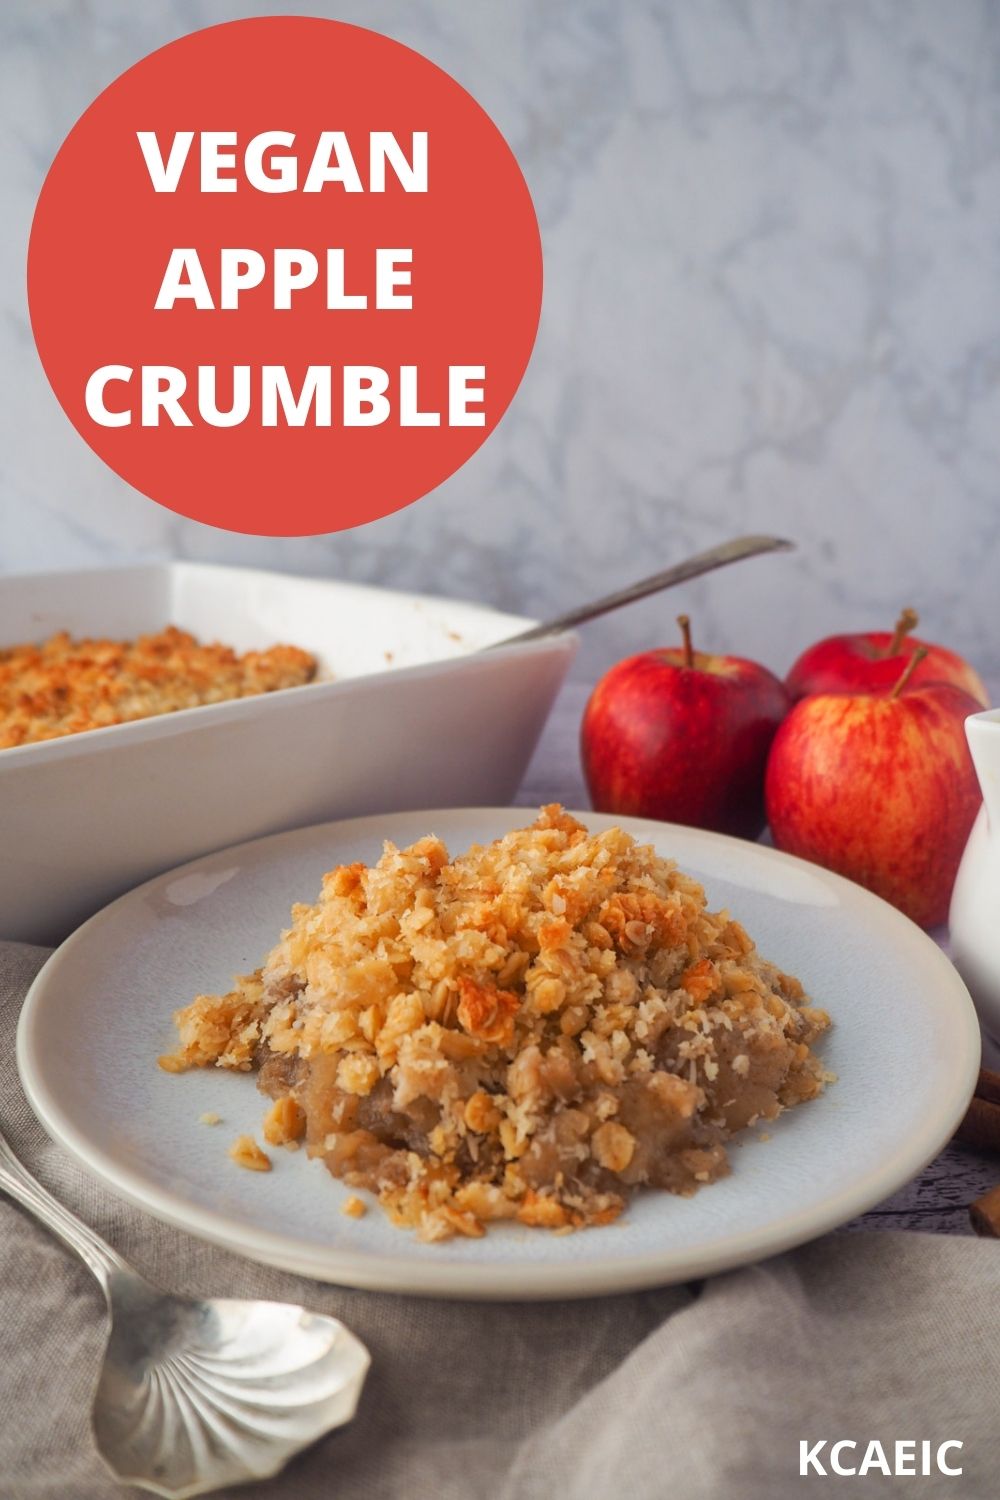 Vegan apple crumble on a plate with crumble and fresh apples in the background, and text overlay, vegan apple crumble and KCAEIC.